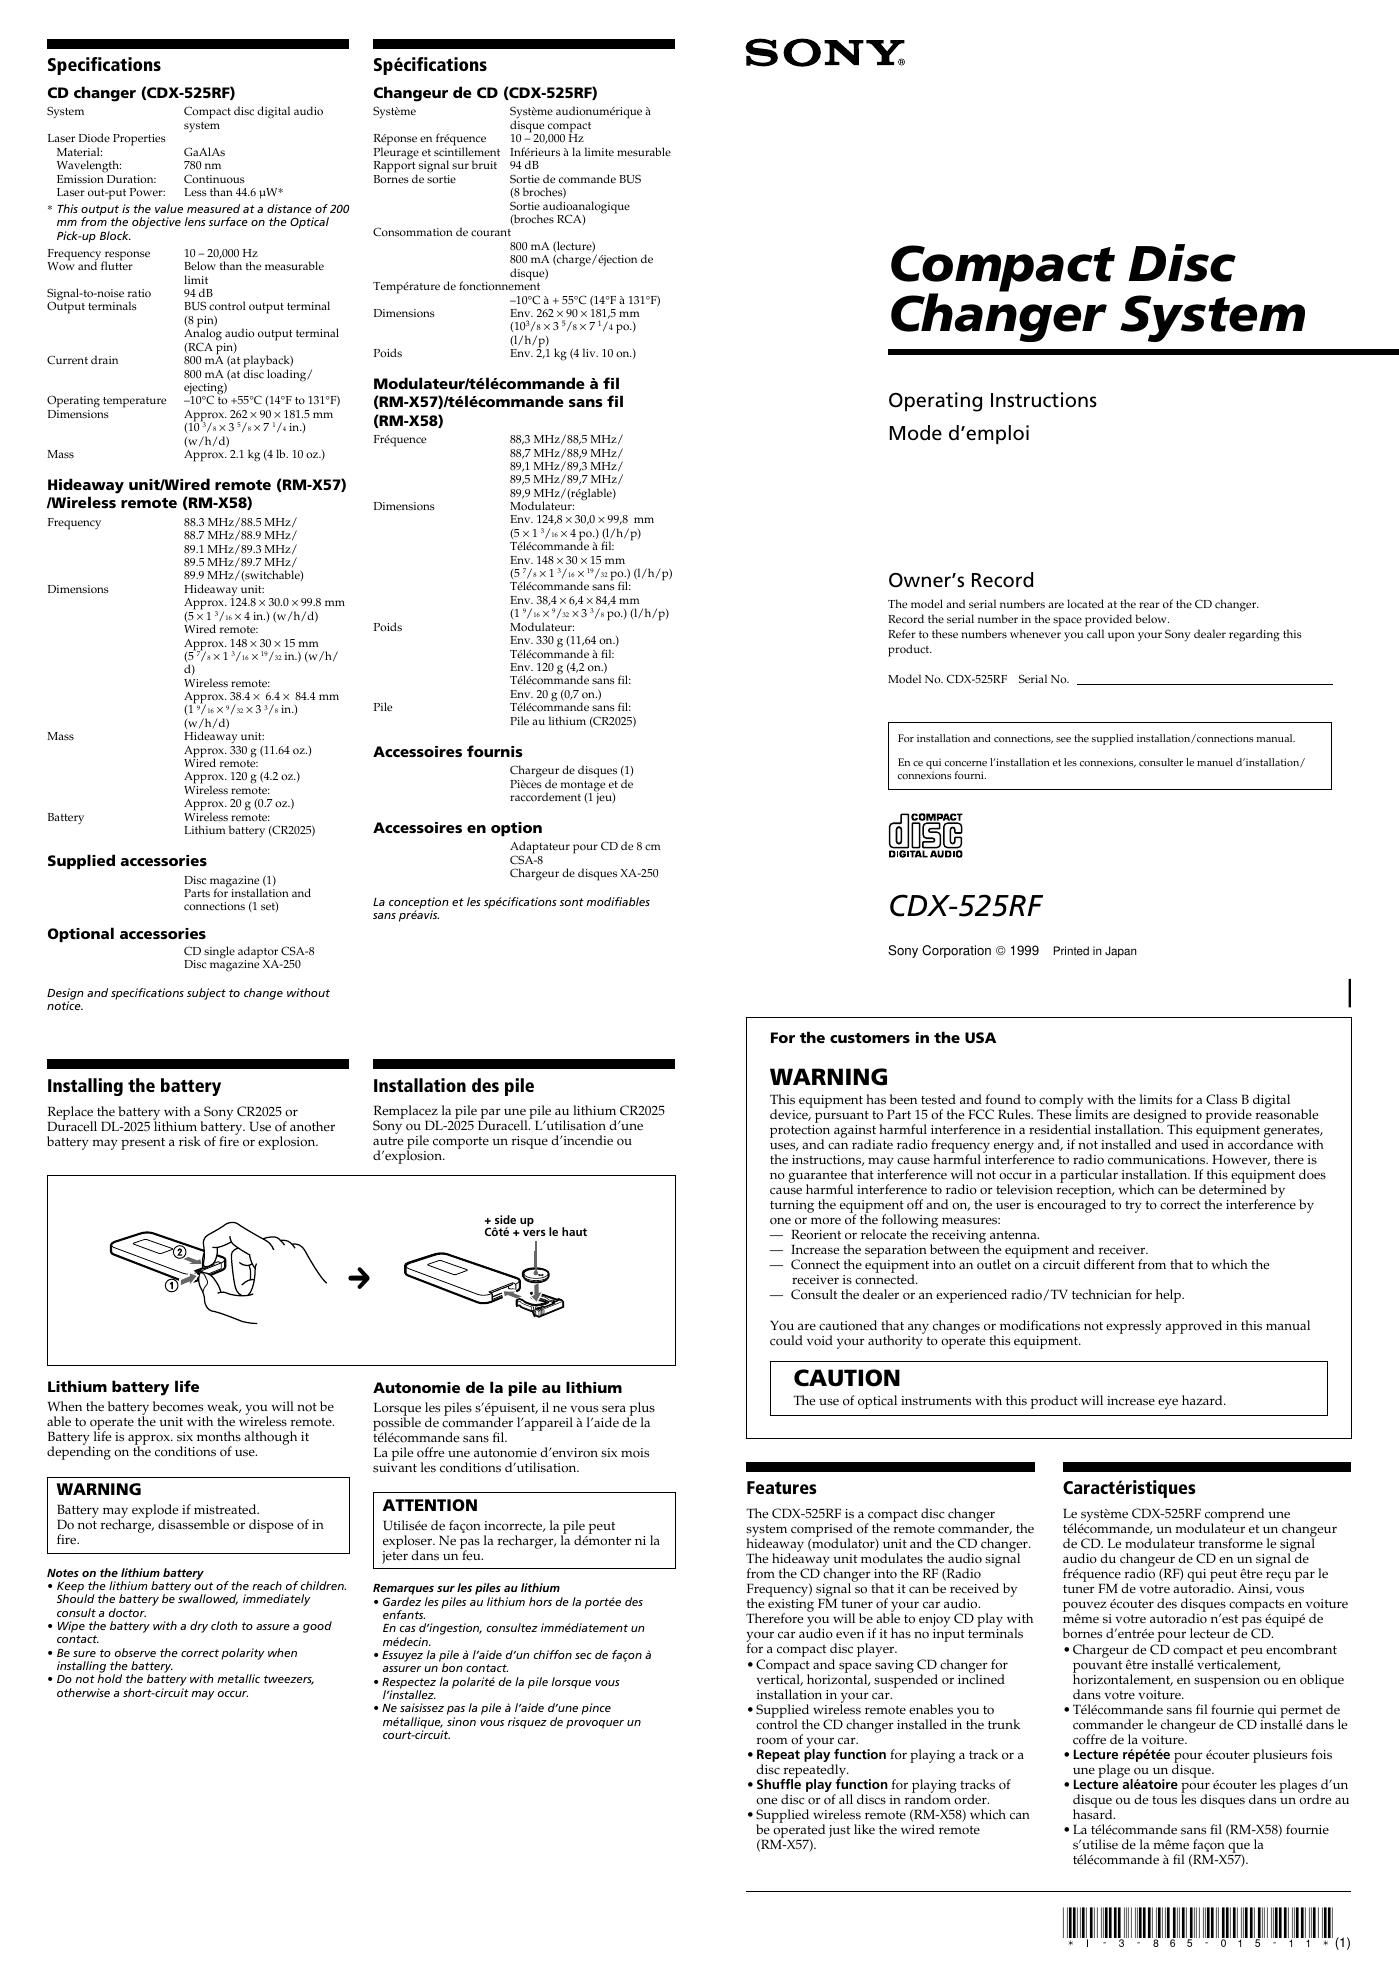 sony cdx 525 rf owners manual